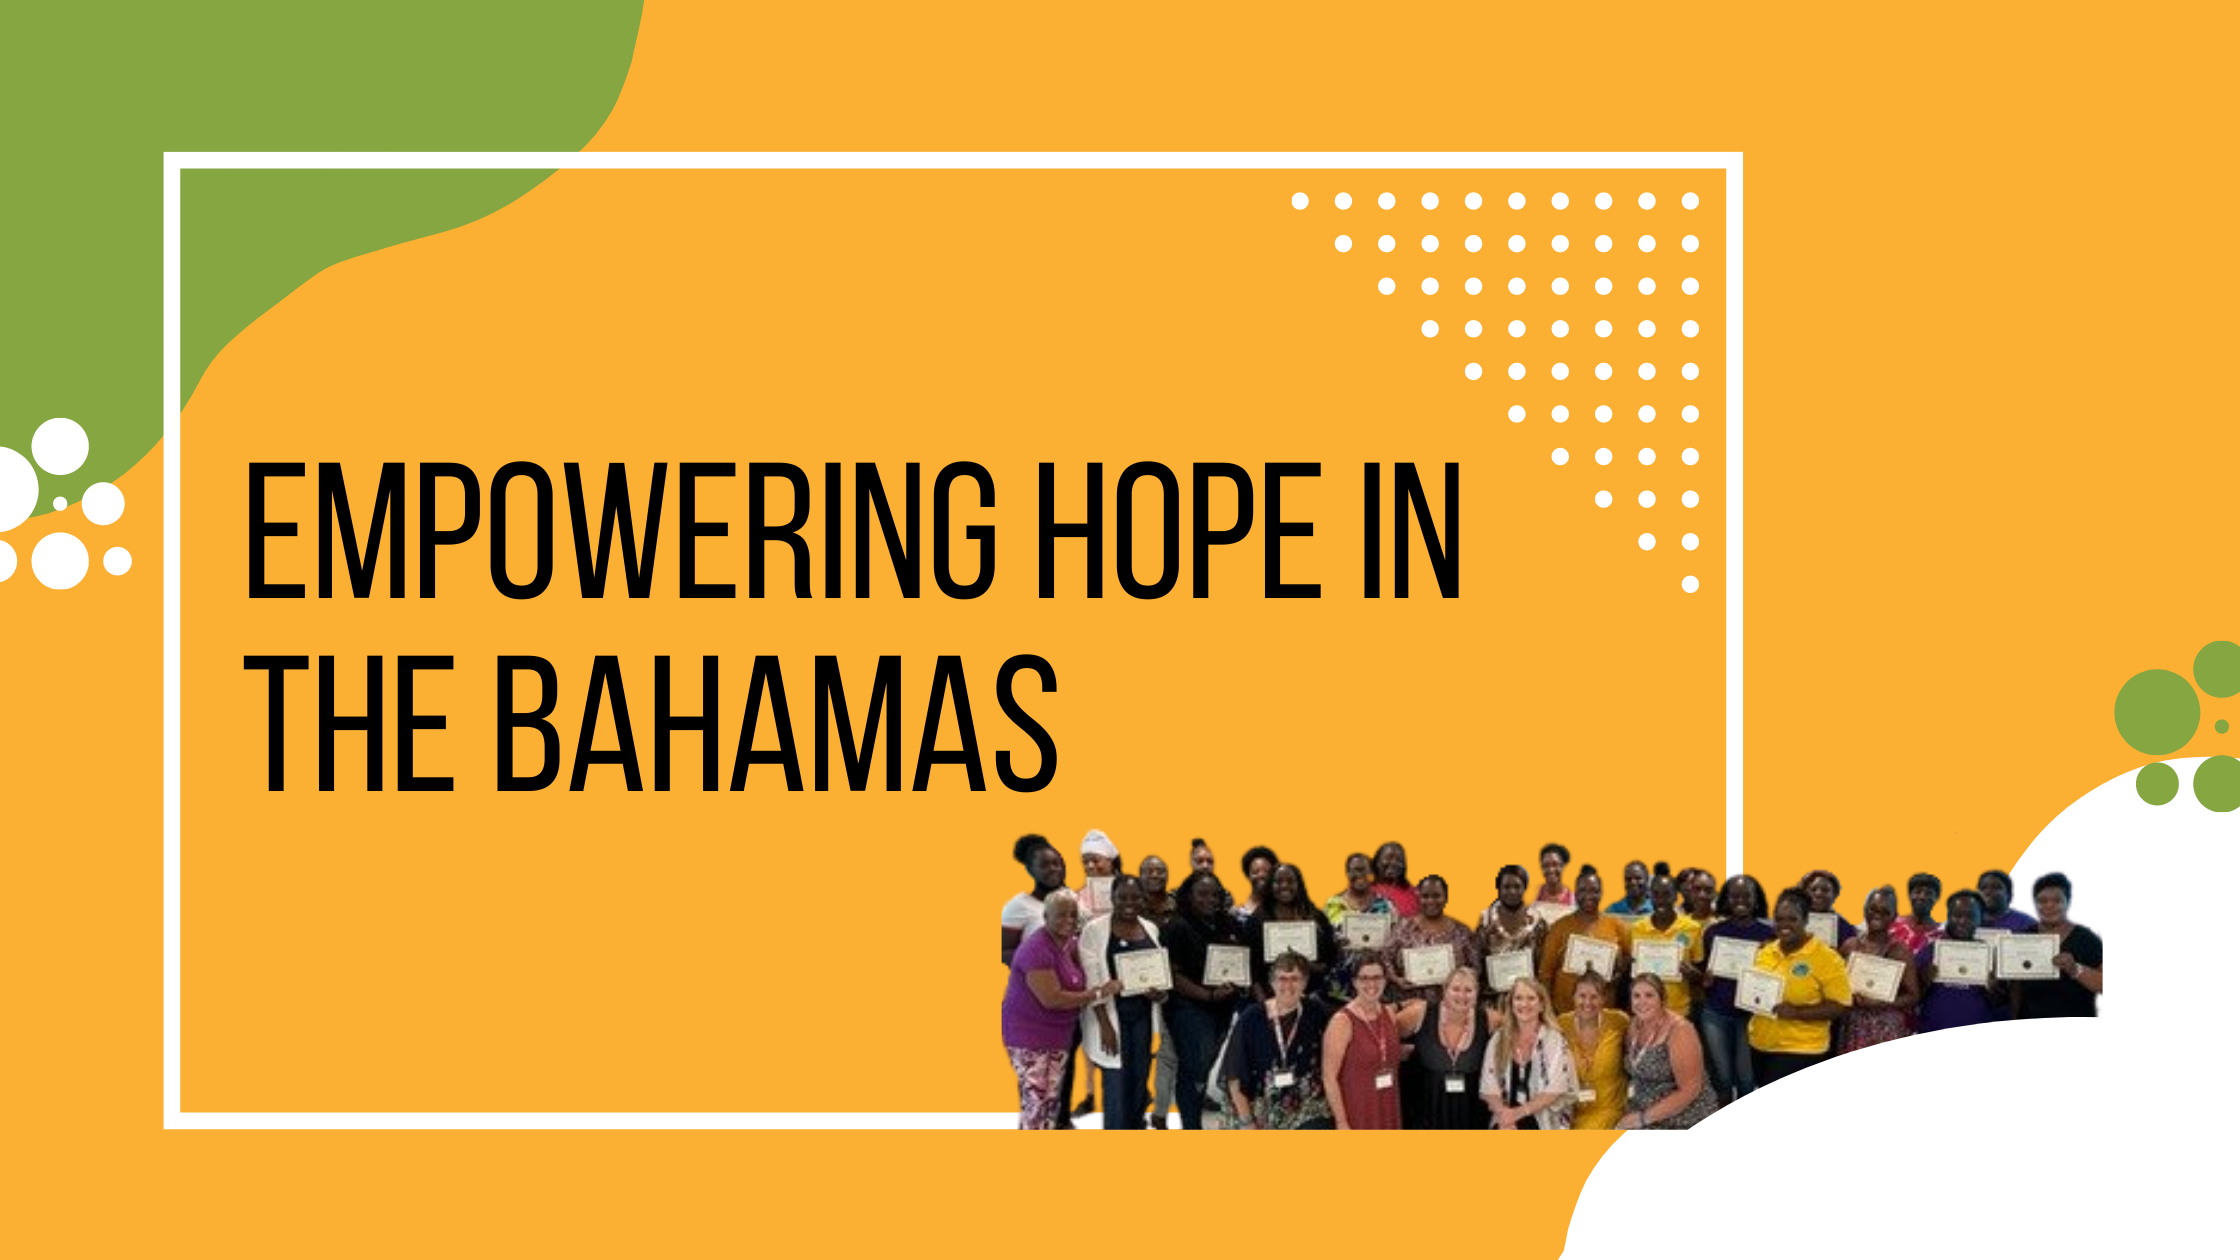 Empowering Hope in the Bahamas